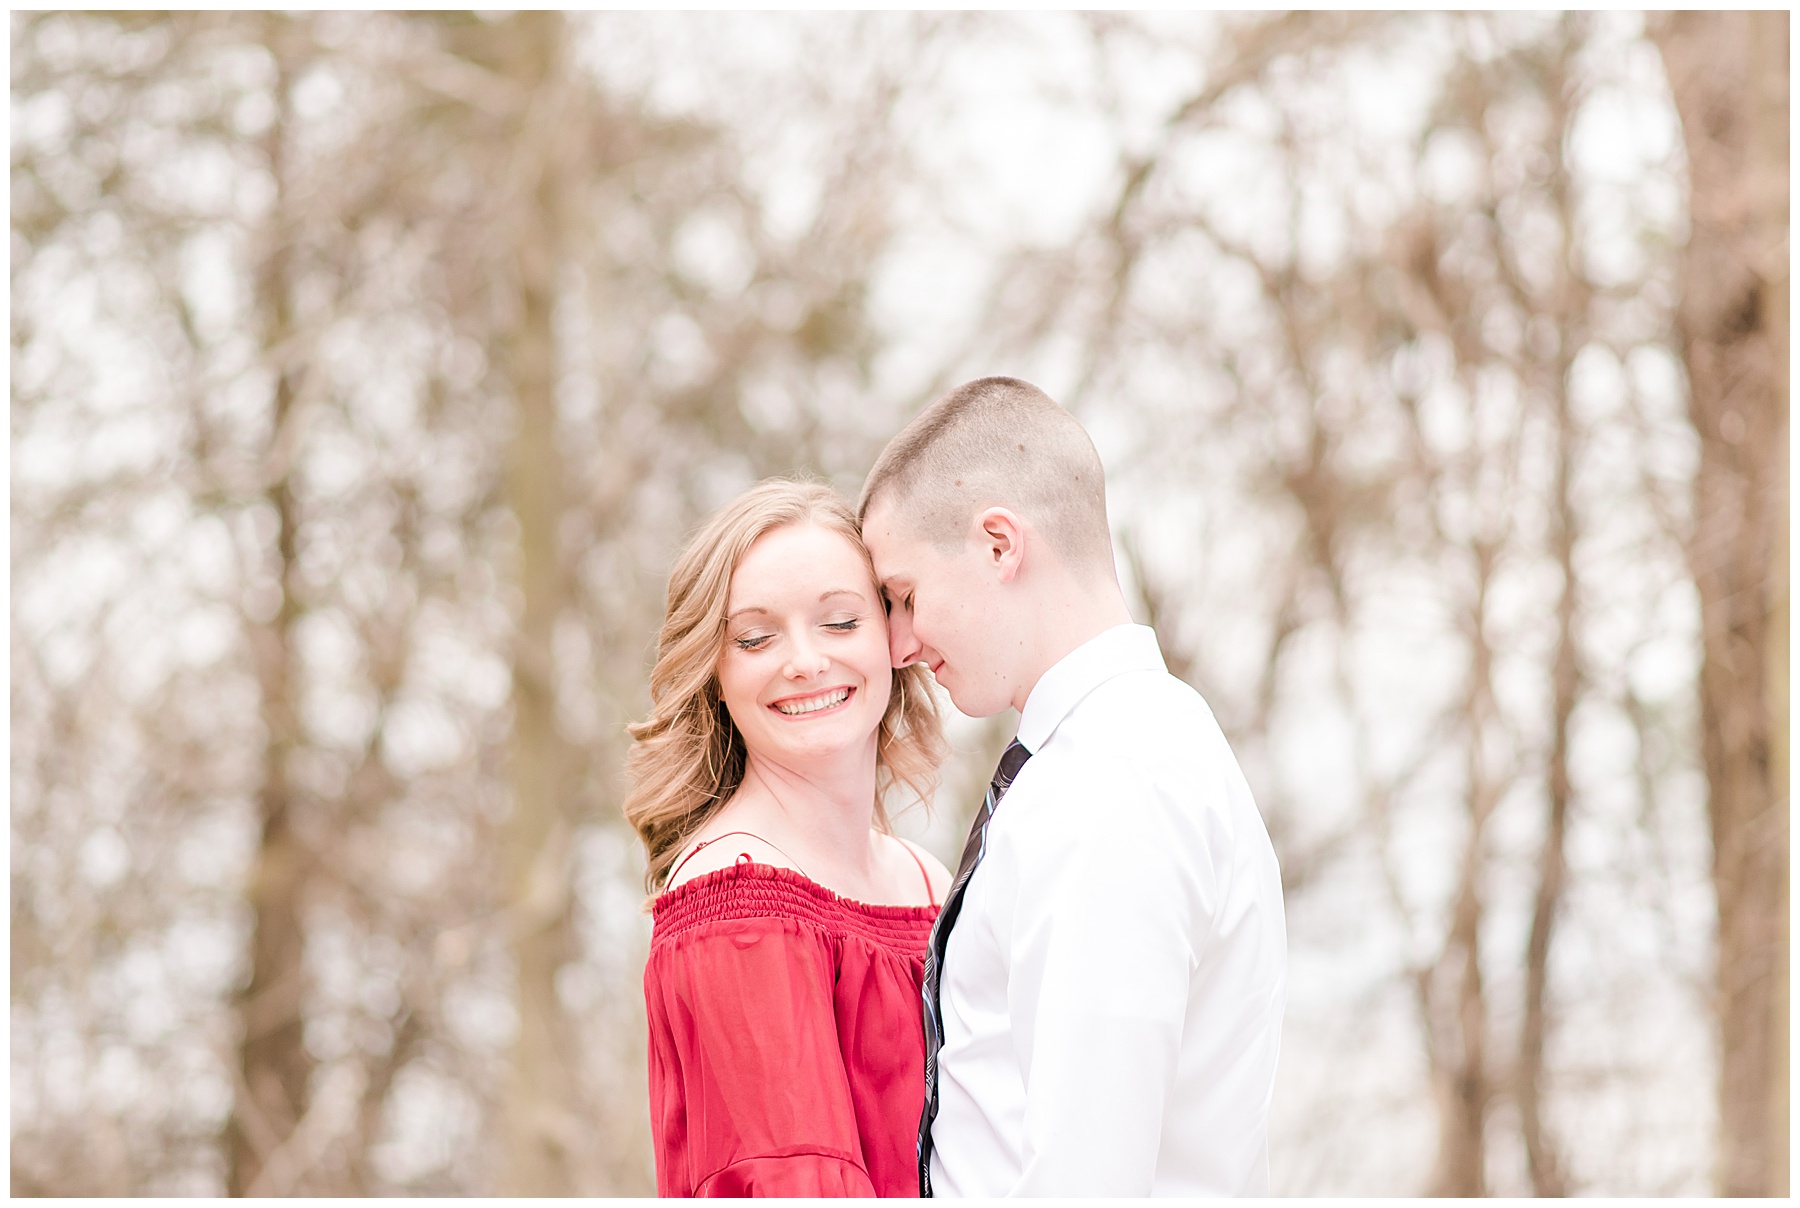 Bride in a red dress is chest to chest with the groom. He is nuzzling her temple while she in smiling with her eyes softly closed for an engagement session at Glenns Valley Nature Park